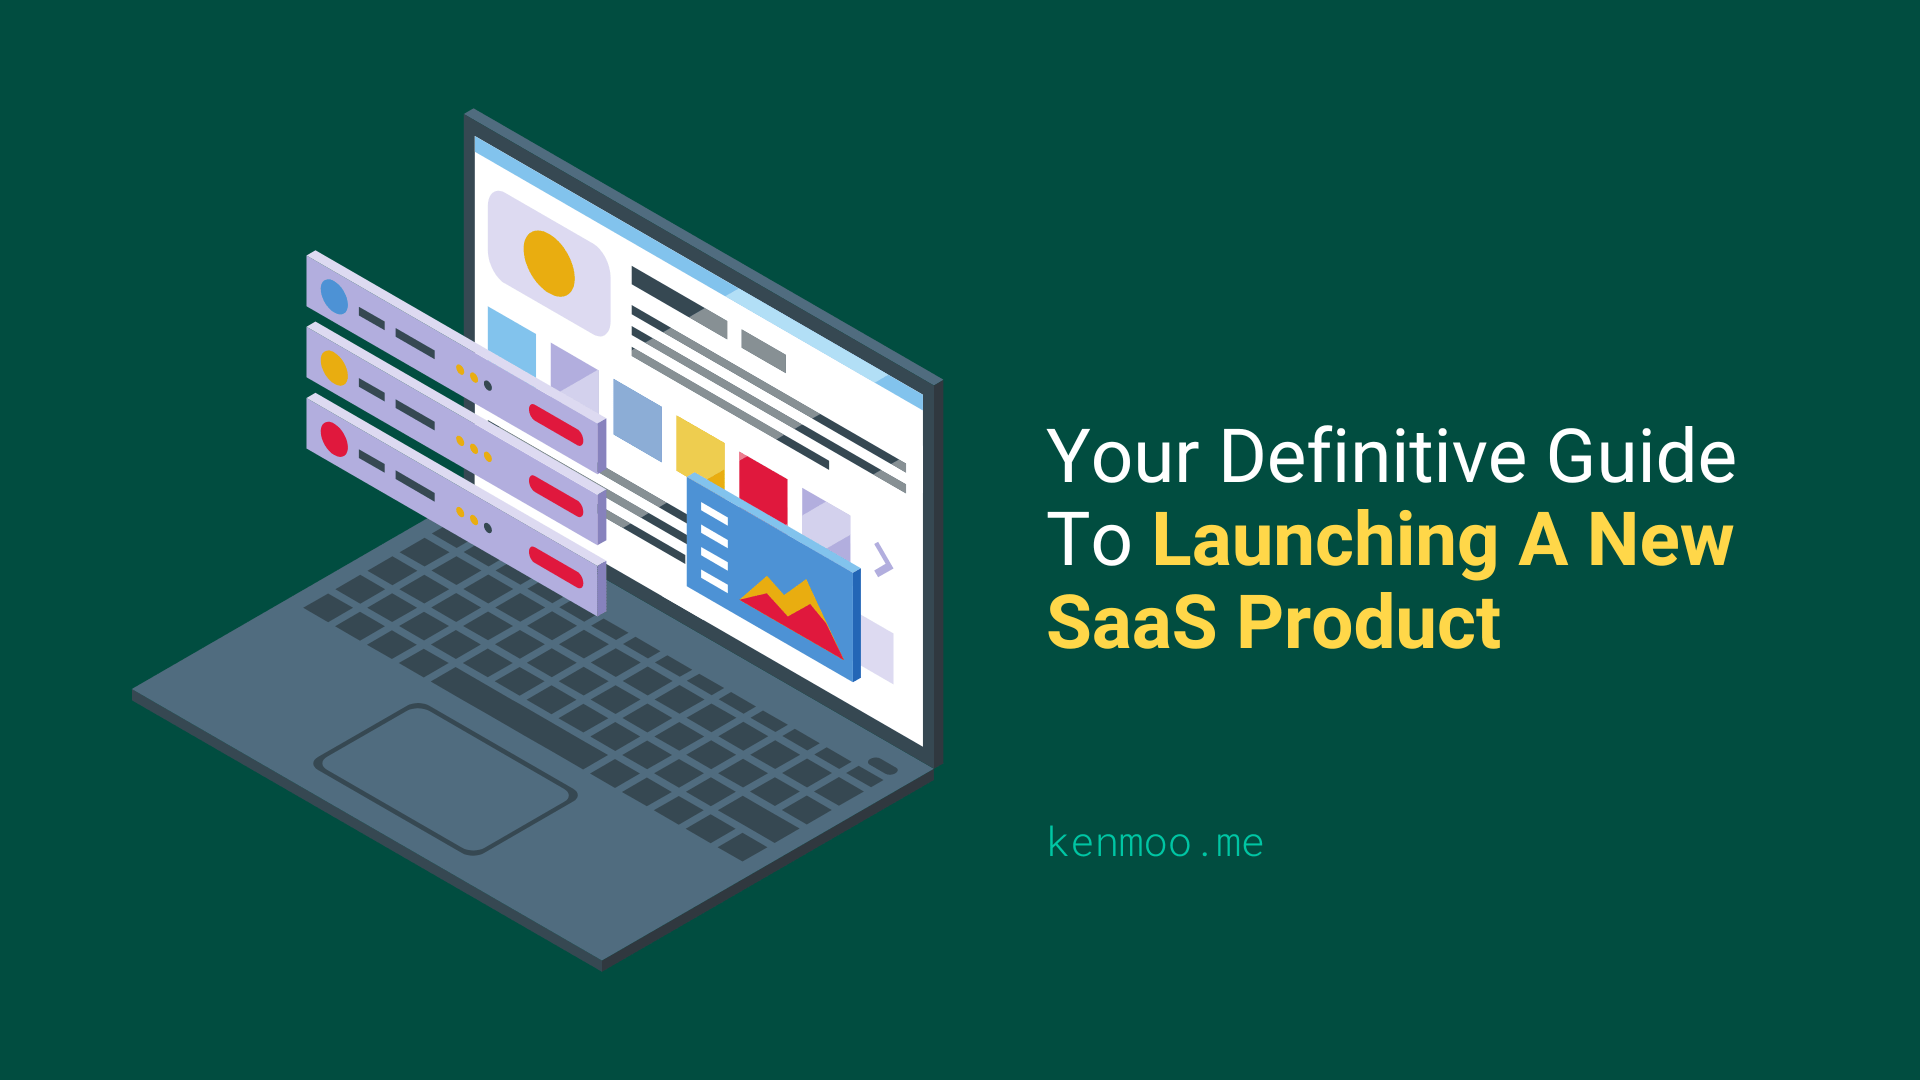 Your Definitive Guide To Launching A New SaaS Product